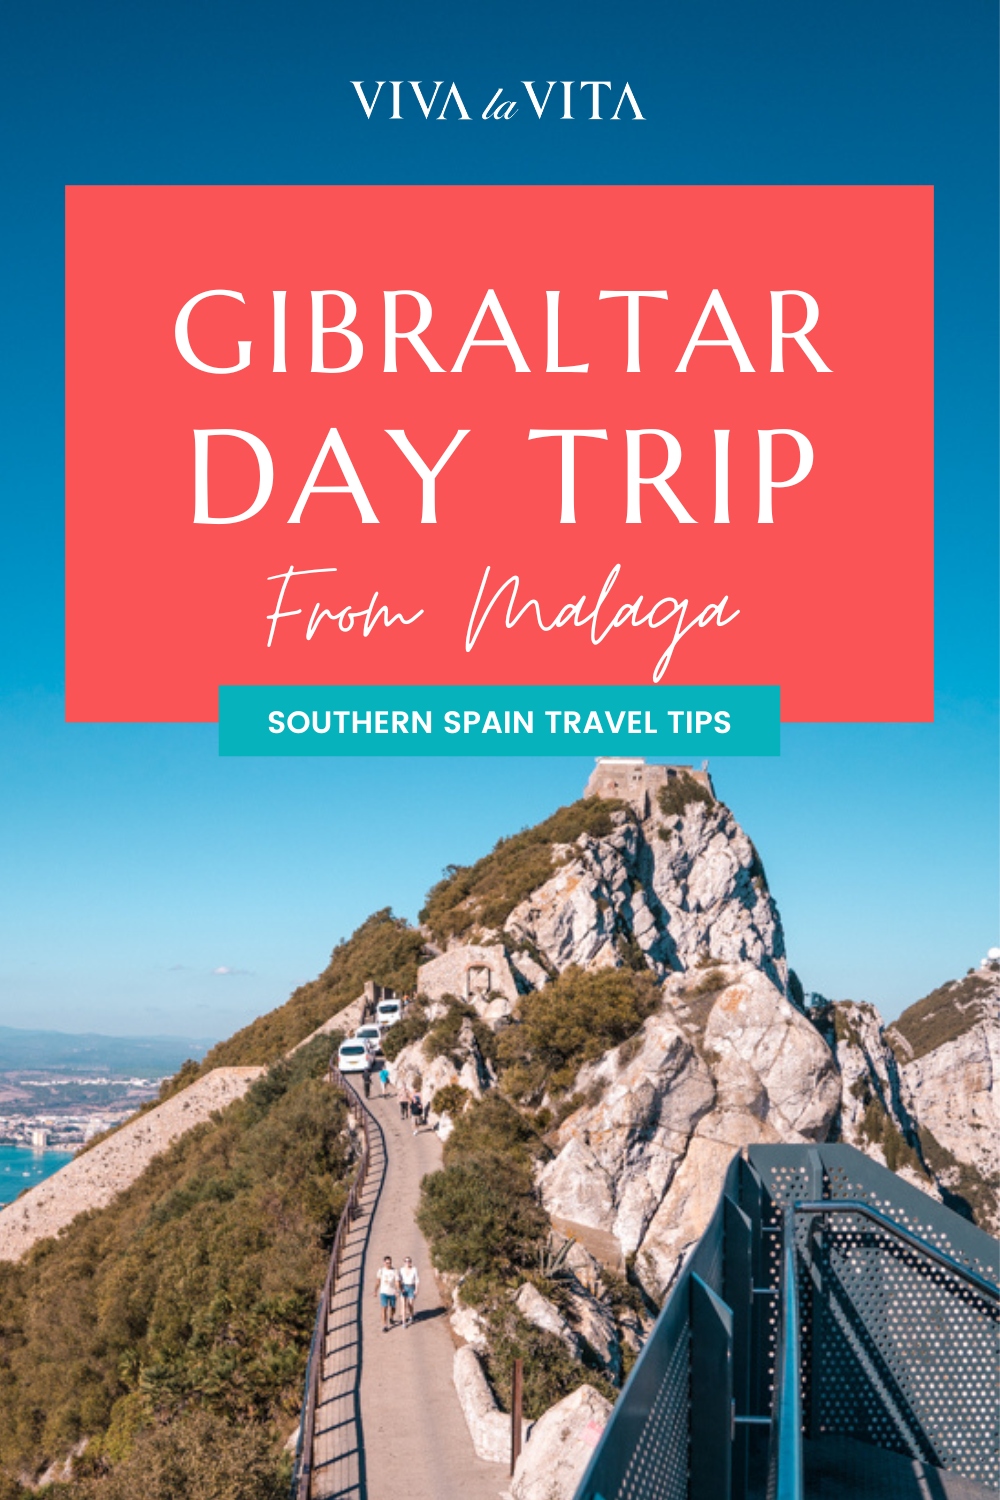 day trip to Gibraltar from Malaga, Spain